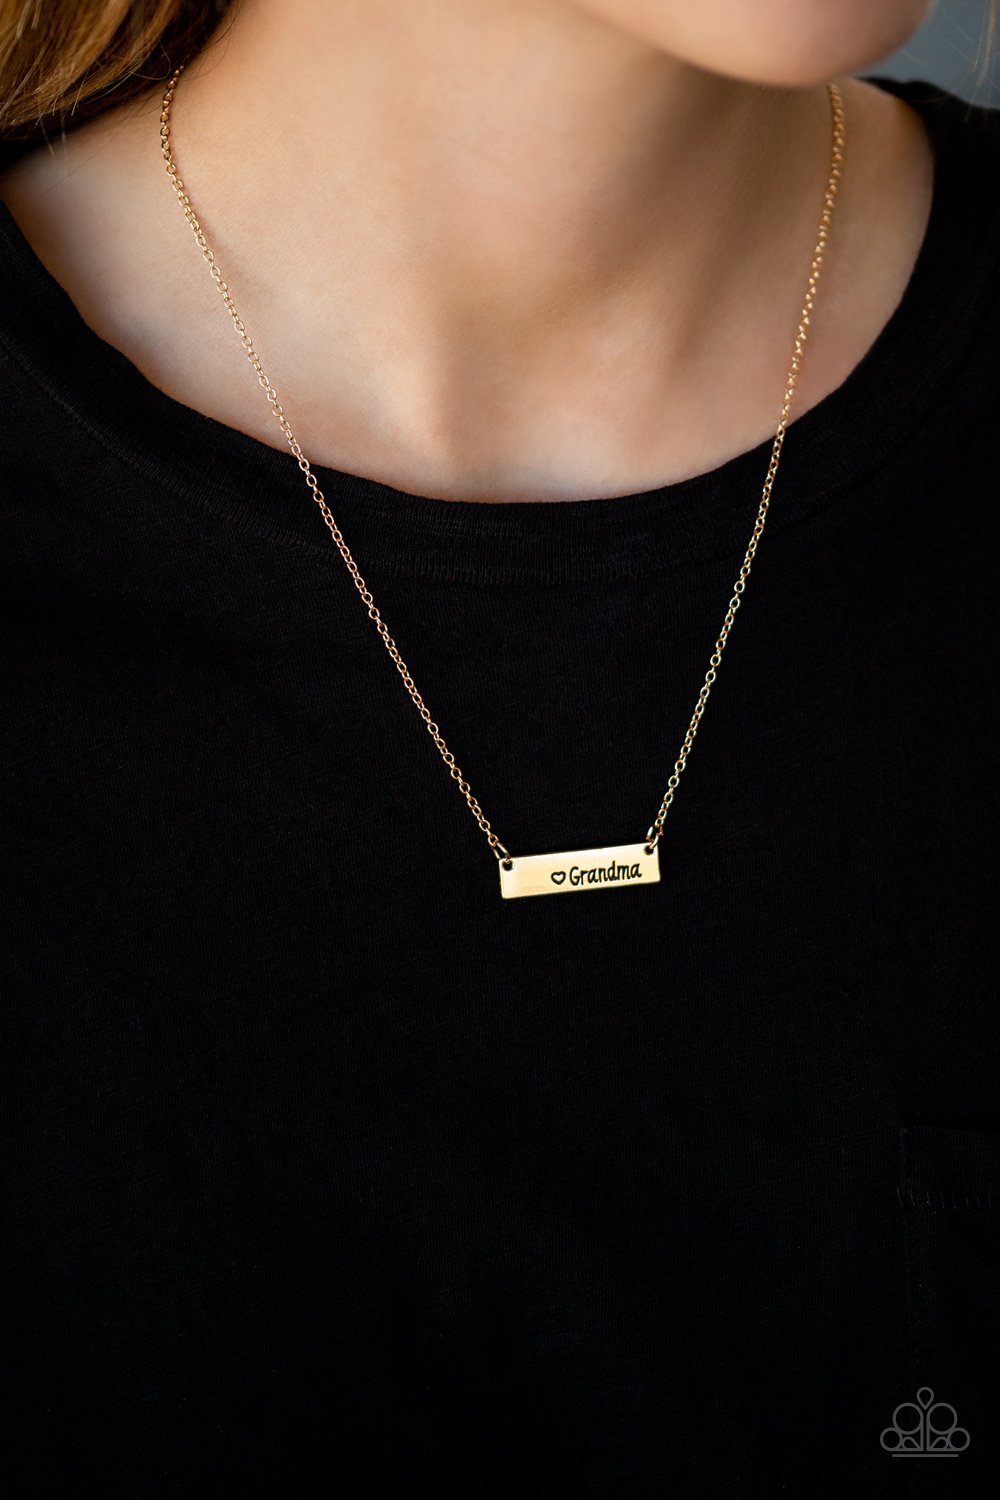 Best Grandma Ever - Gold Necklace